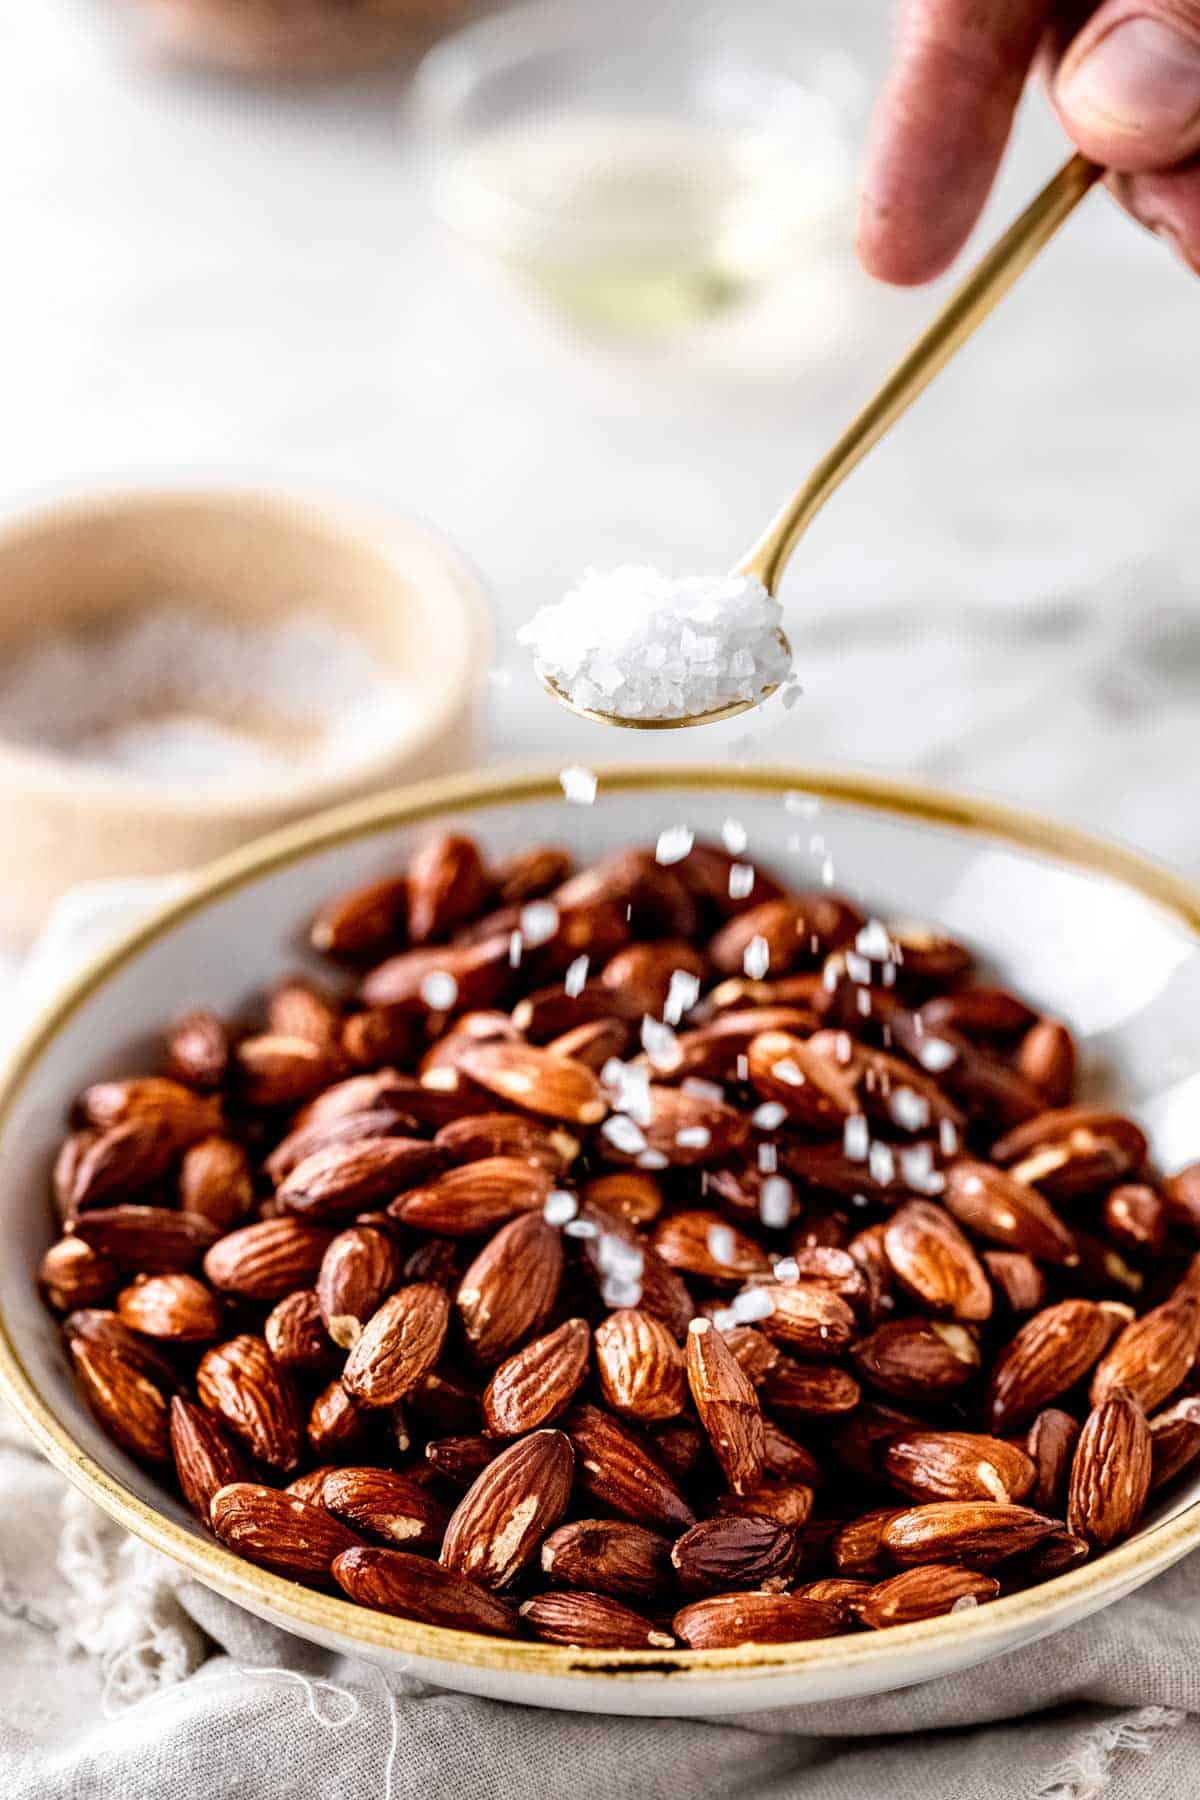 A bowl of roasted almonds with coarse salt being sprinkled onto them with a gold spoon.